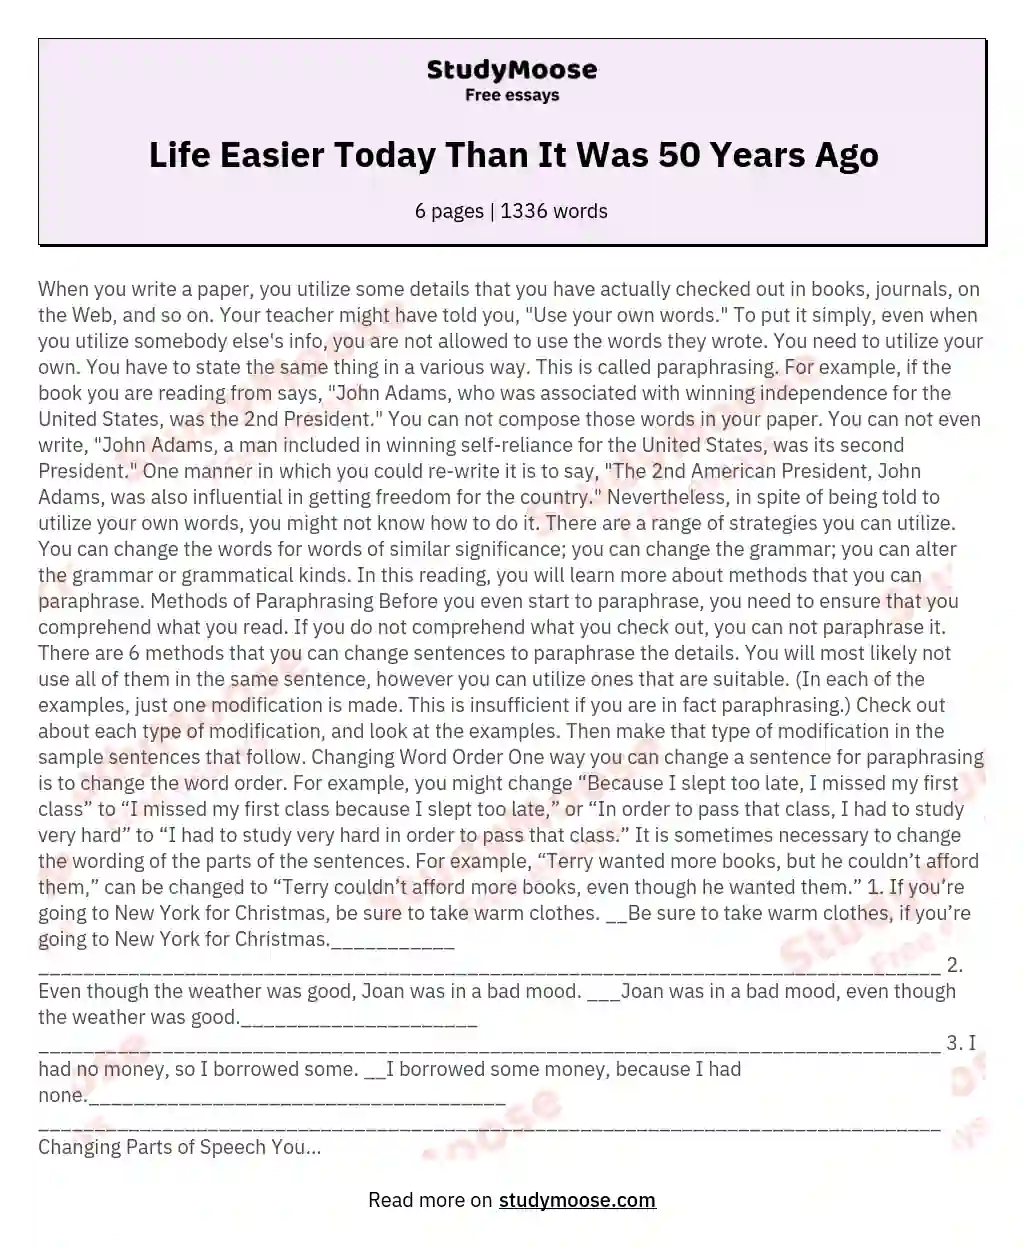 Life Easier Today Than It Was 50 Years Ago essay